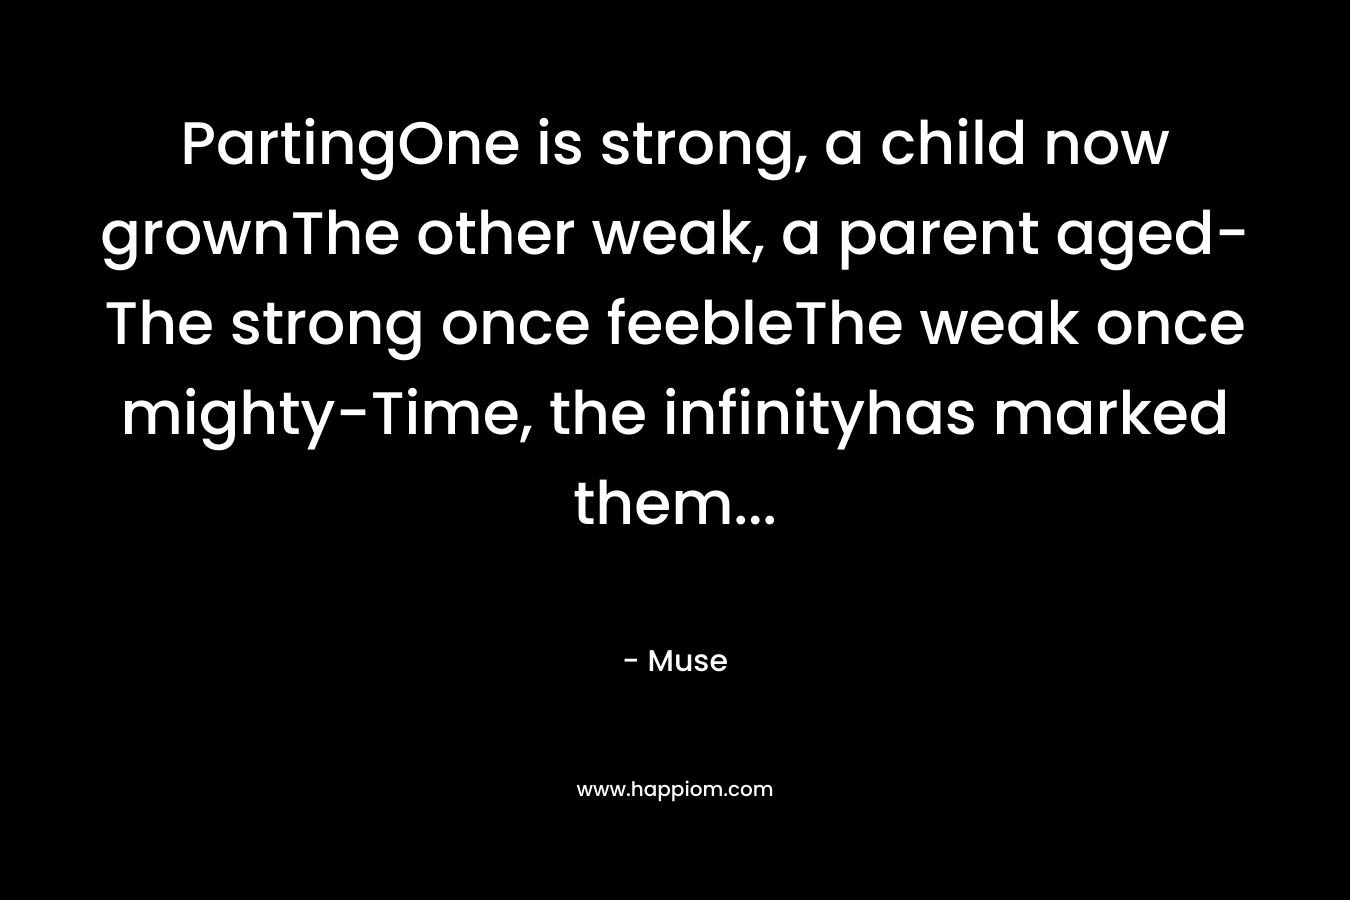 PartingOne is strong, a child now grownThe other weak, a parent aged-The strong once feebleThe weak once mighty-Time, the infinityhas marked them… – Muse